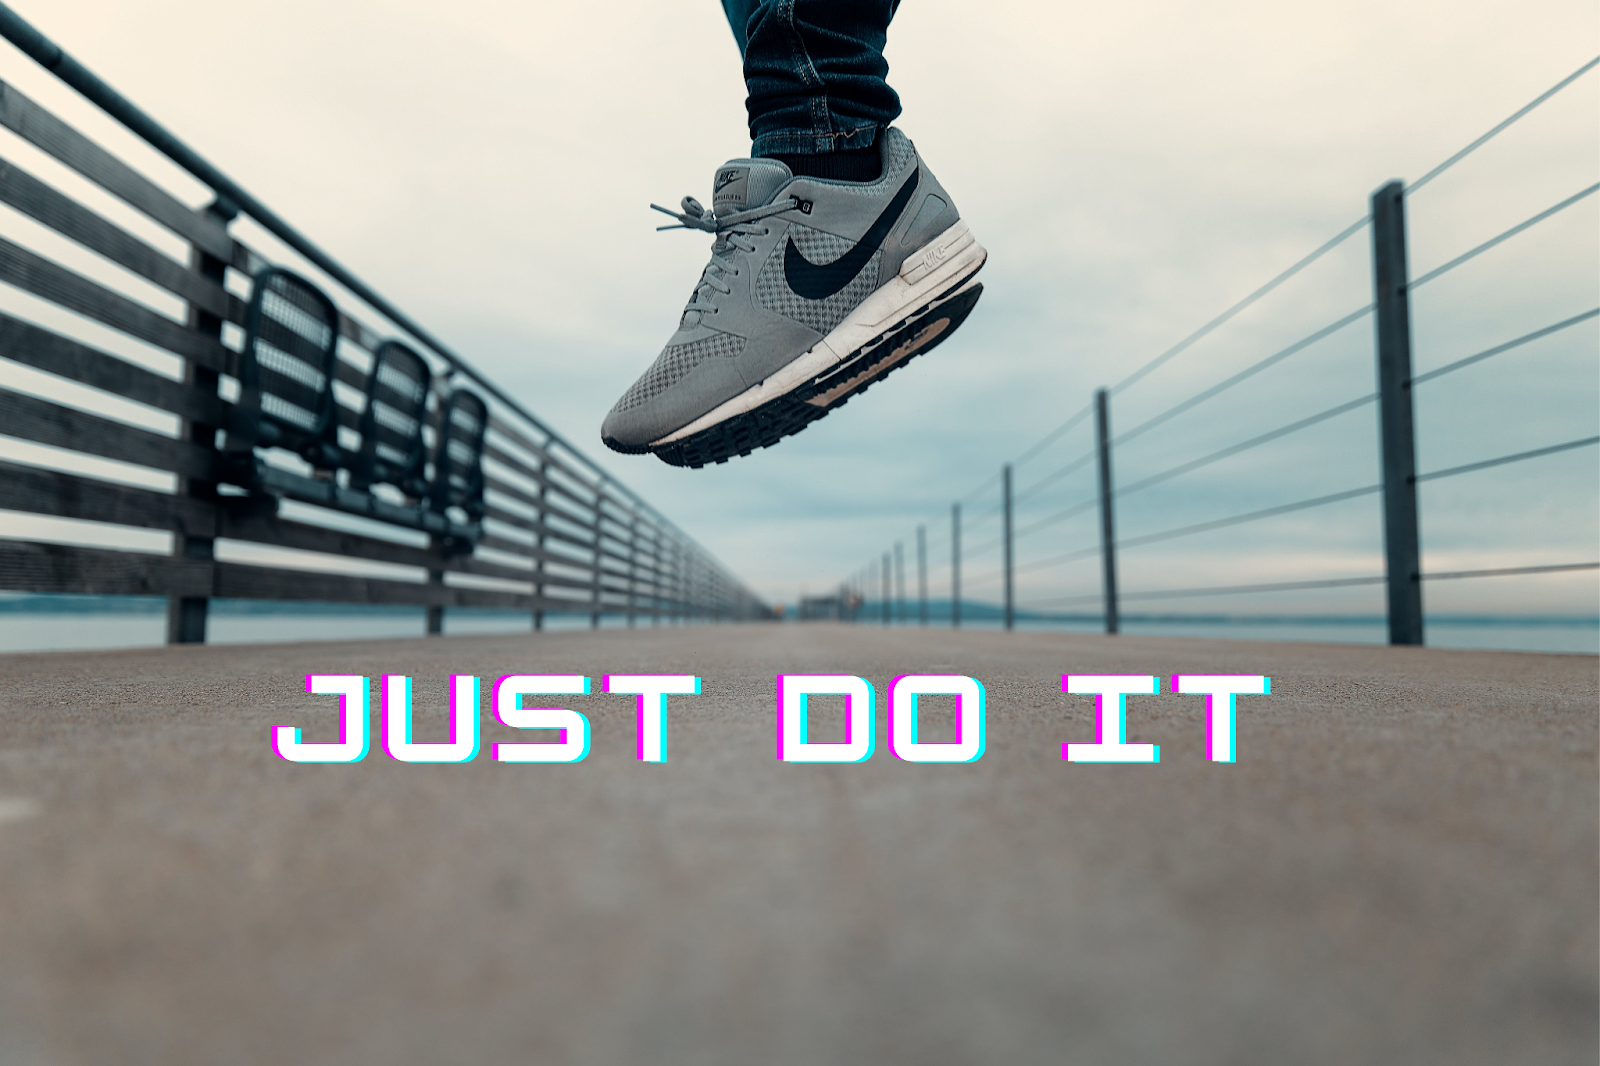 Catchy Nike Captions and Quotes
